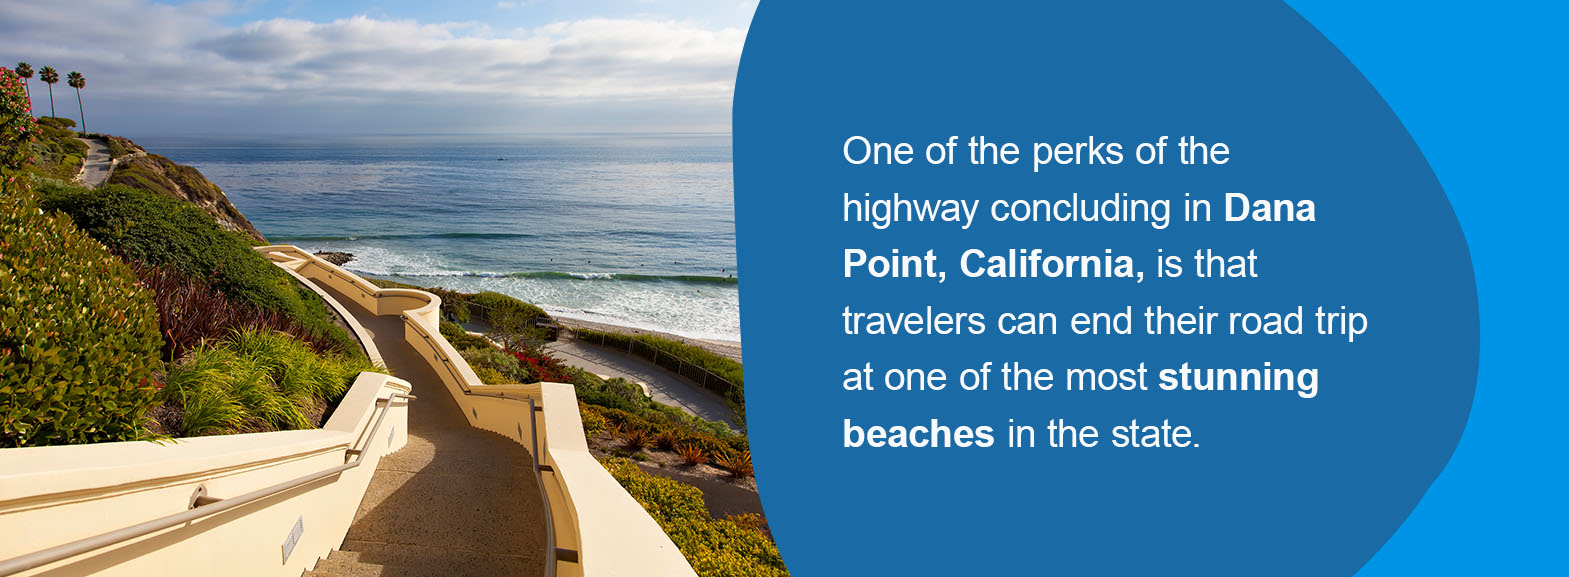 One of the perks of the highway concluding here is that travelers can end their road trip at one of the most stunning beaches in the state. 